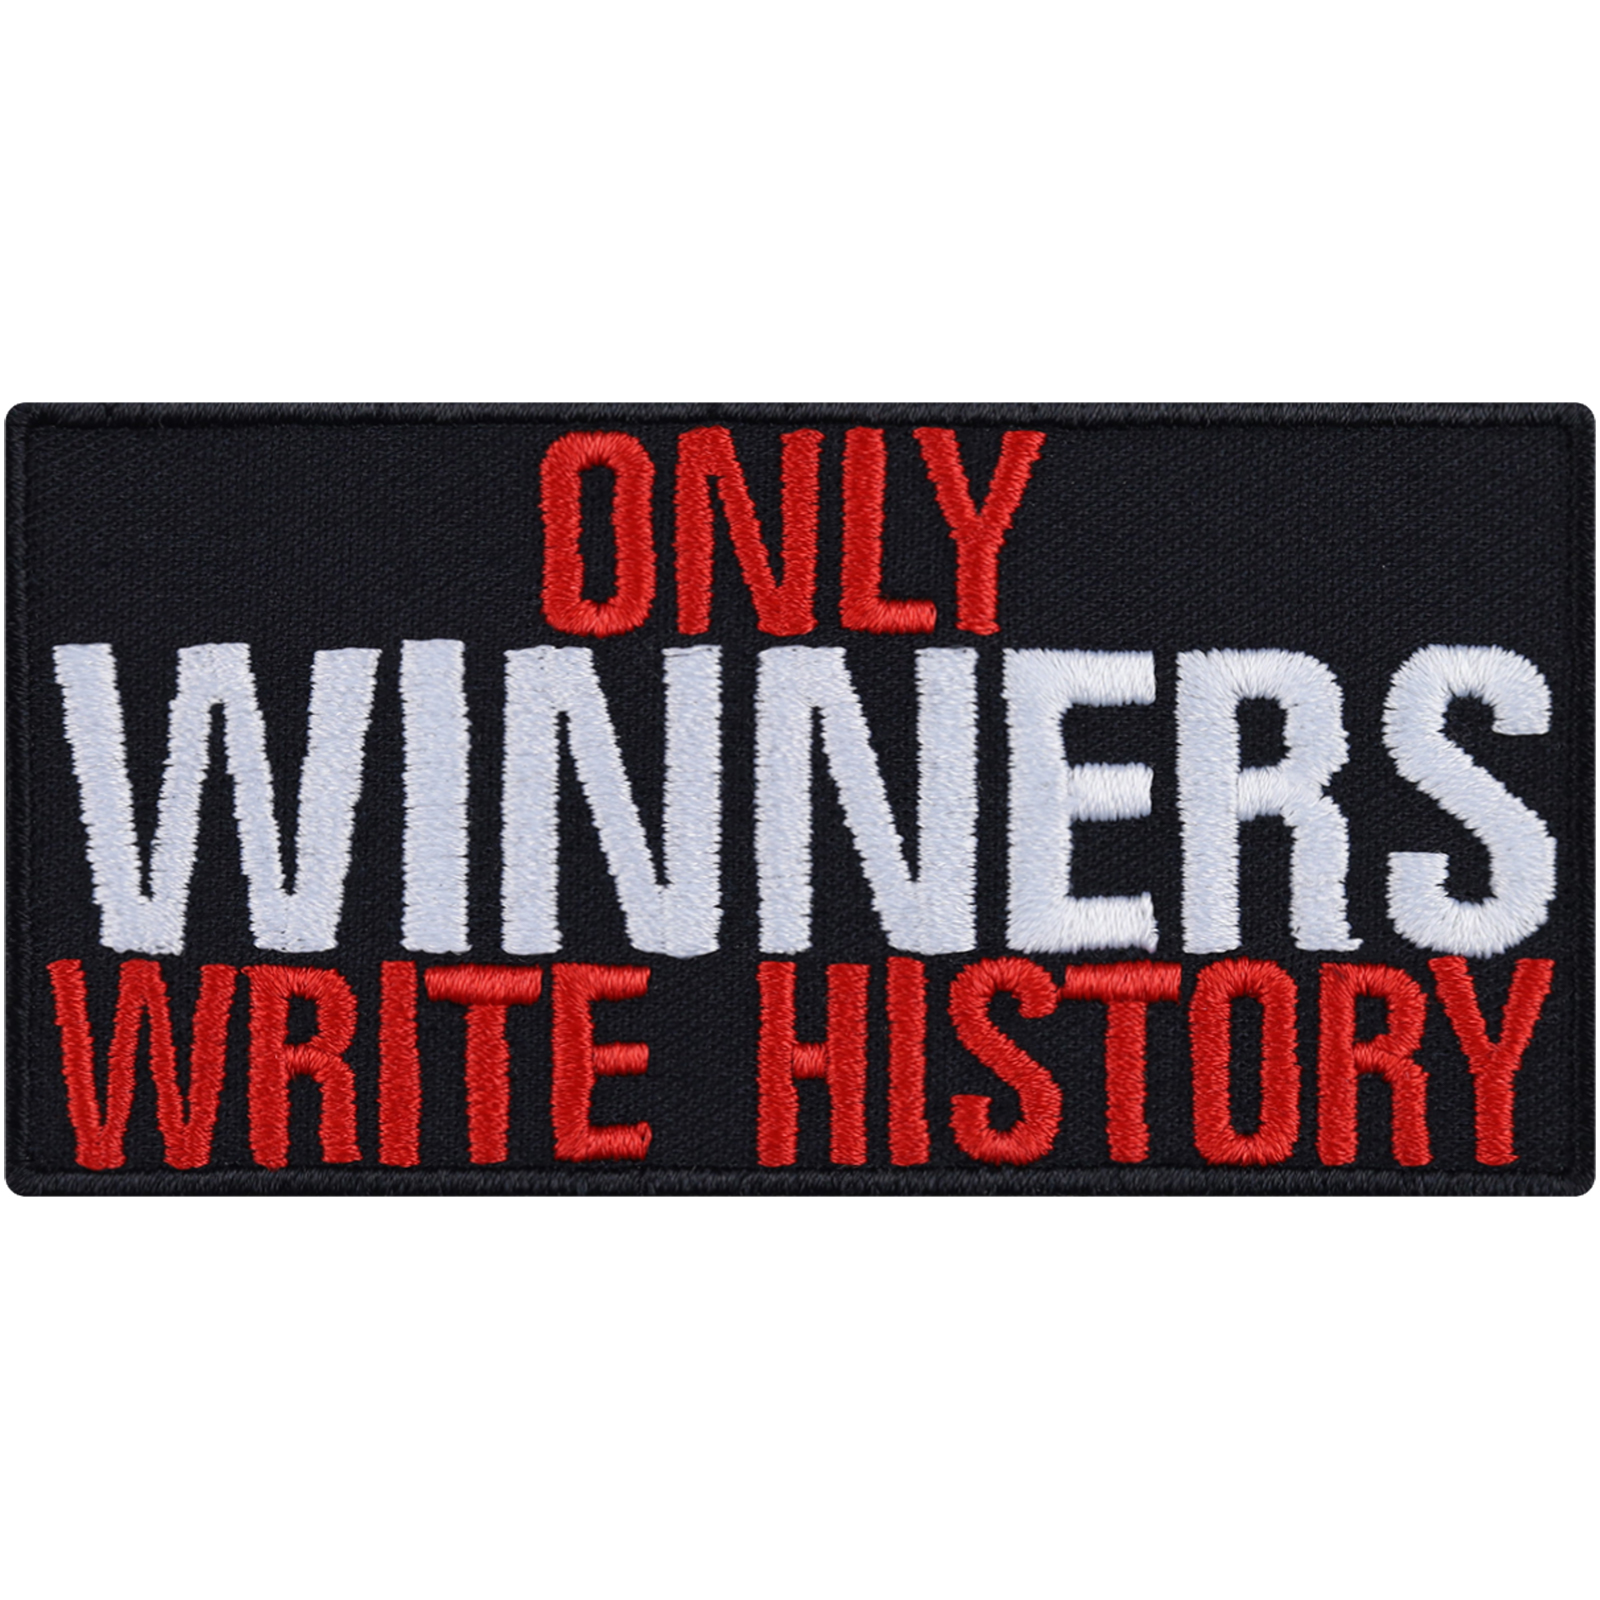 Only winners write history - Patch